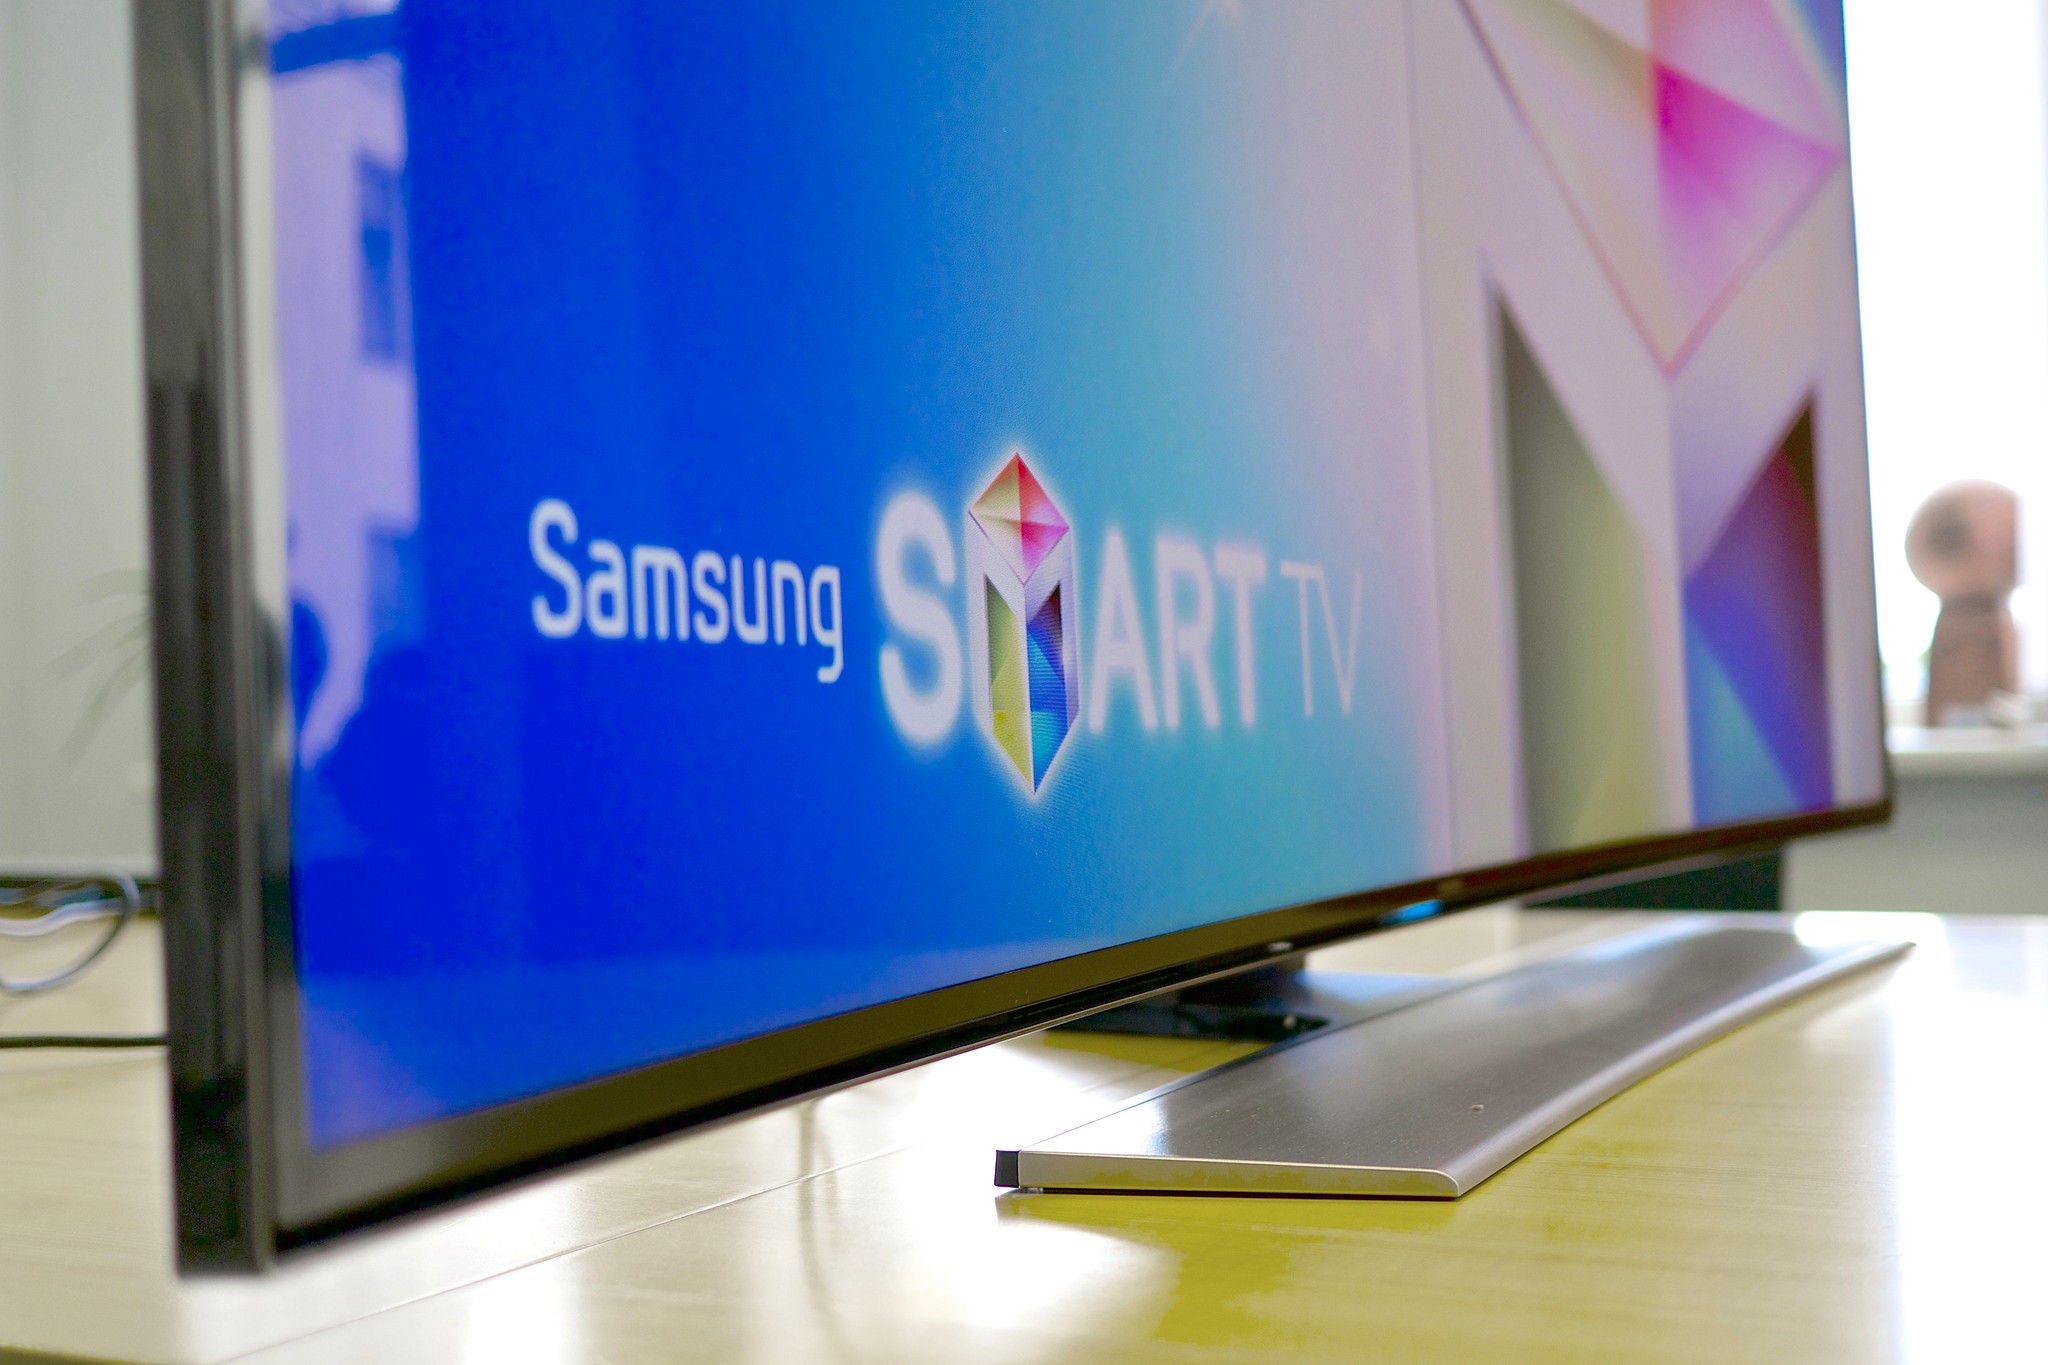 Samsung smart TVs are set to upload screenshots of what